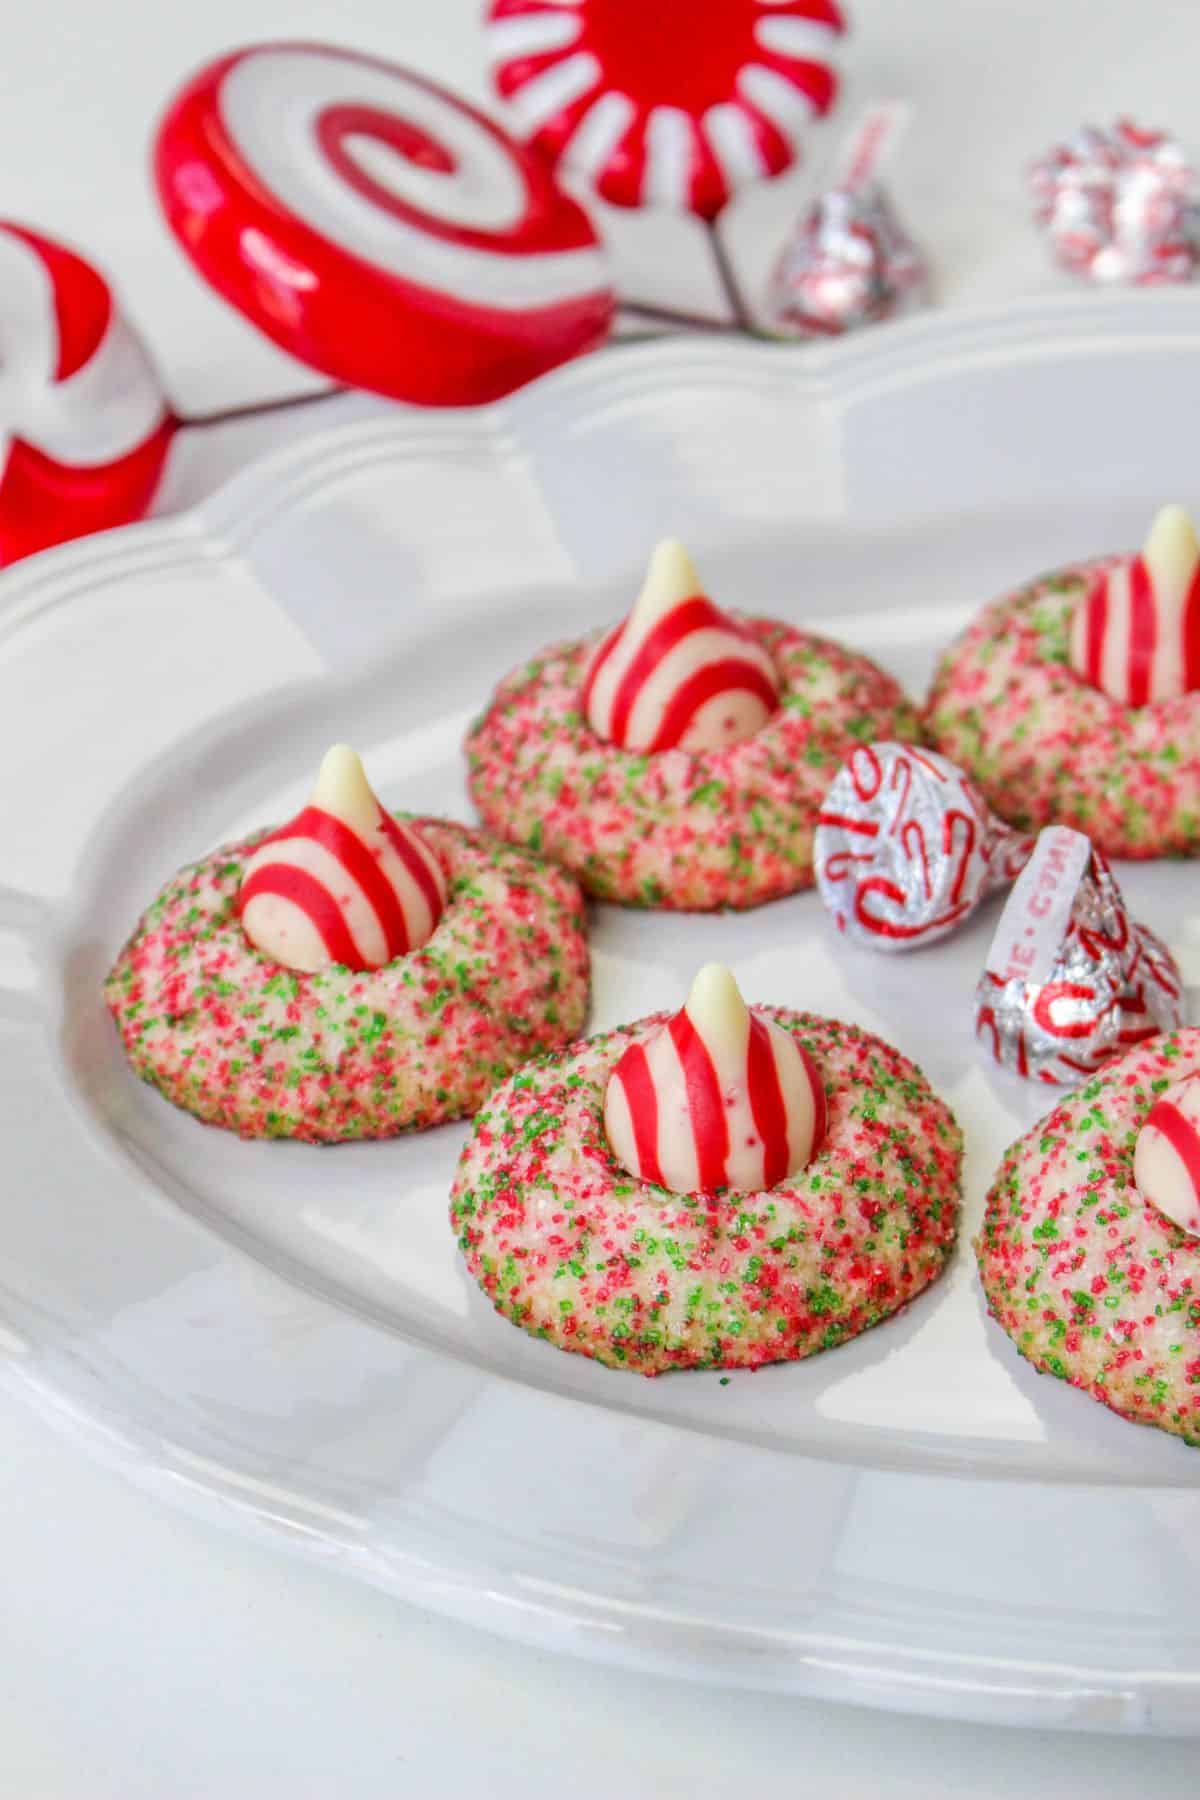 off center image of a white plate with candy cane shortbread cookies and candy cane hershey kisses on it